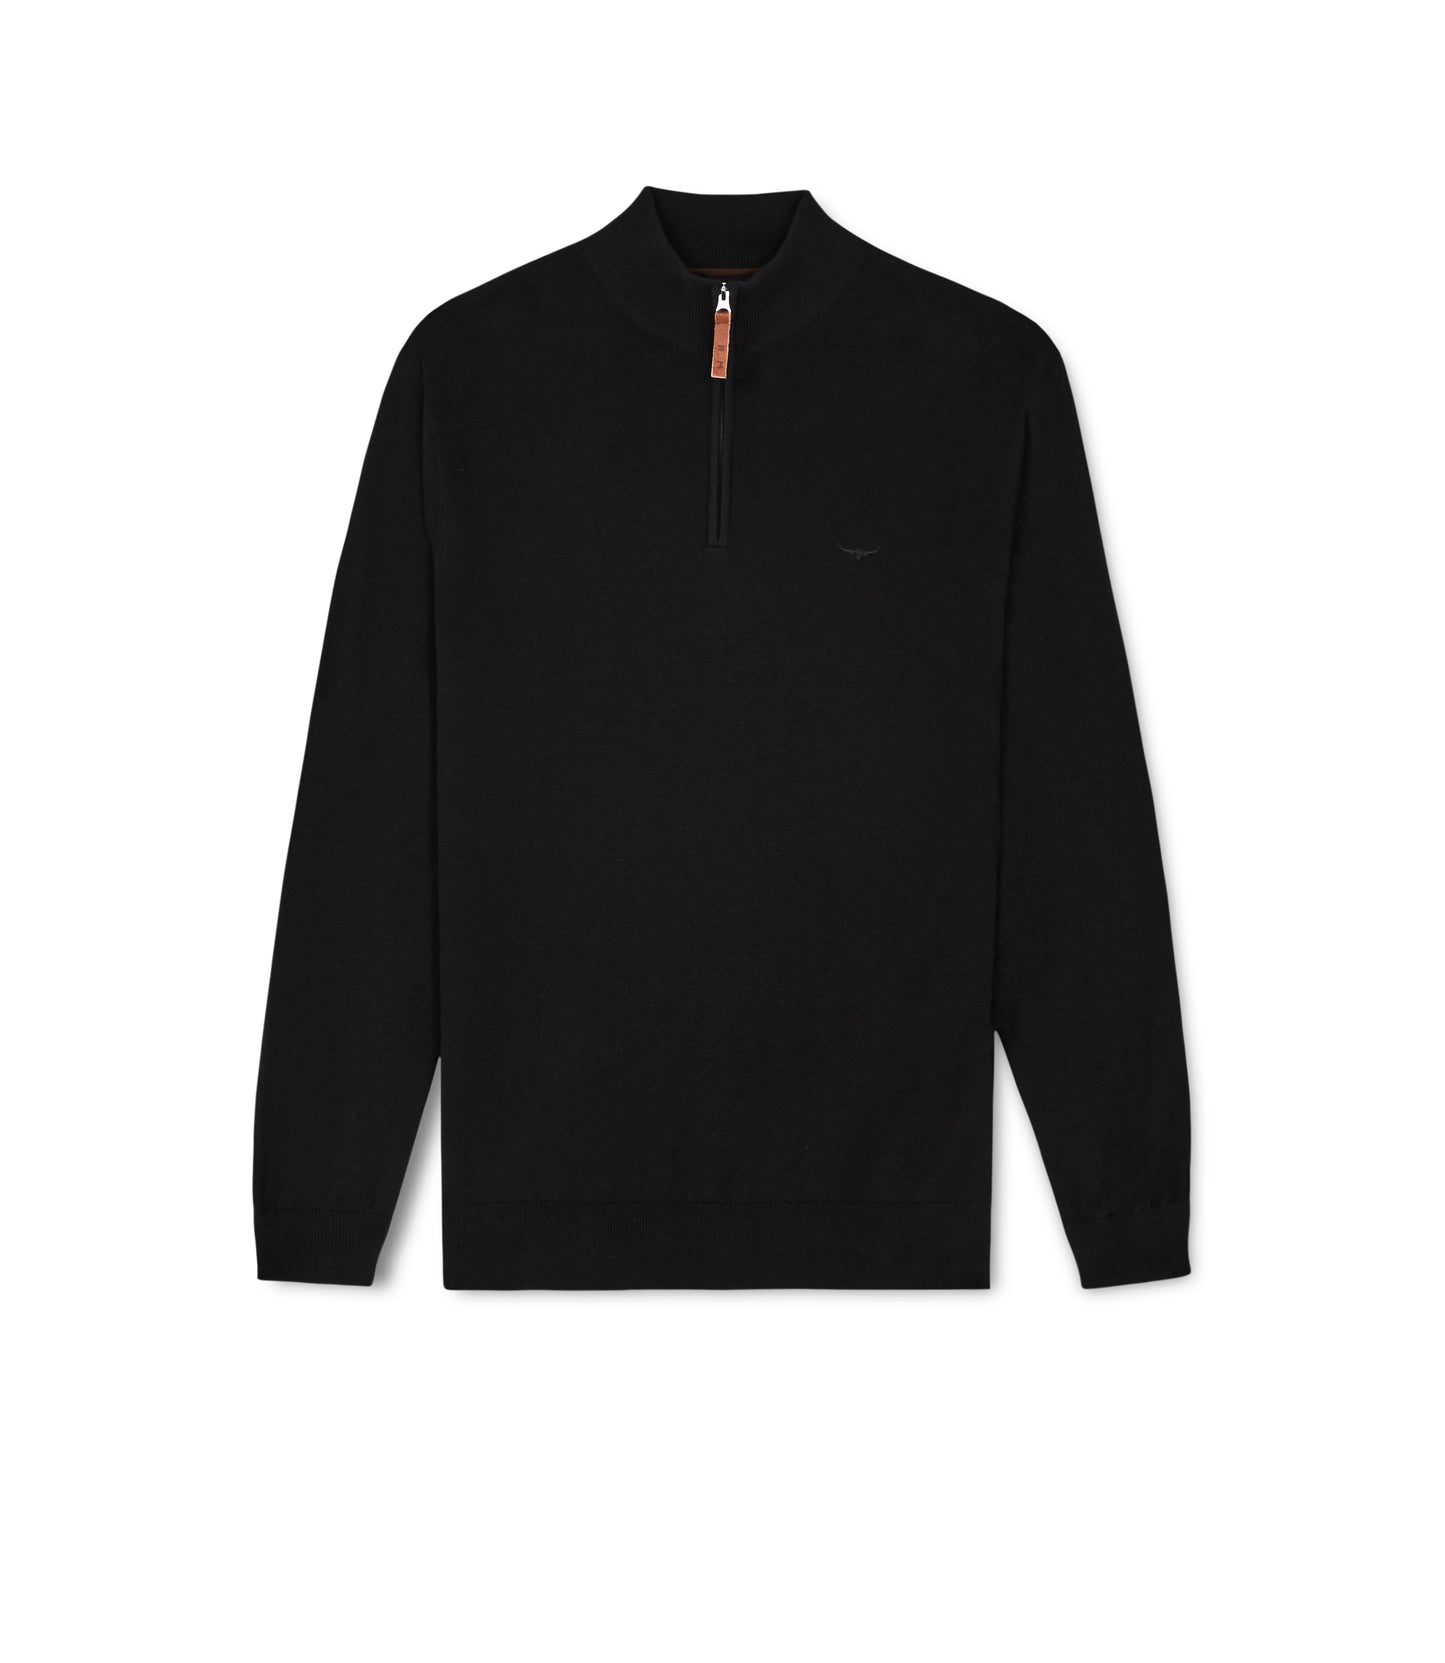 R.M Williams Knitwear, The Ernest Sweater in Black